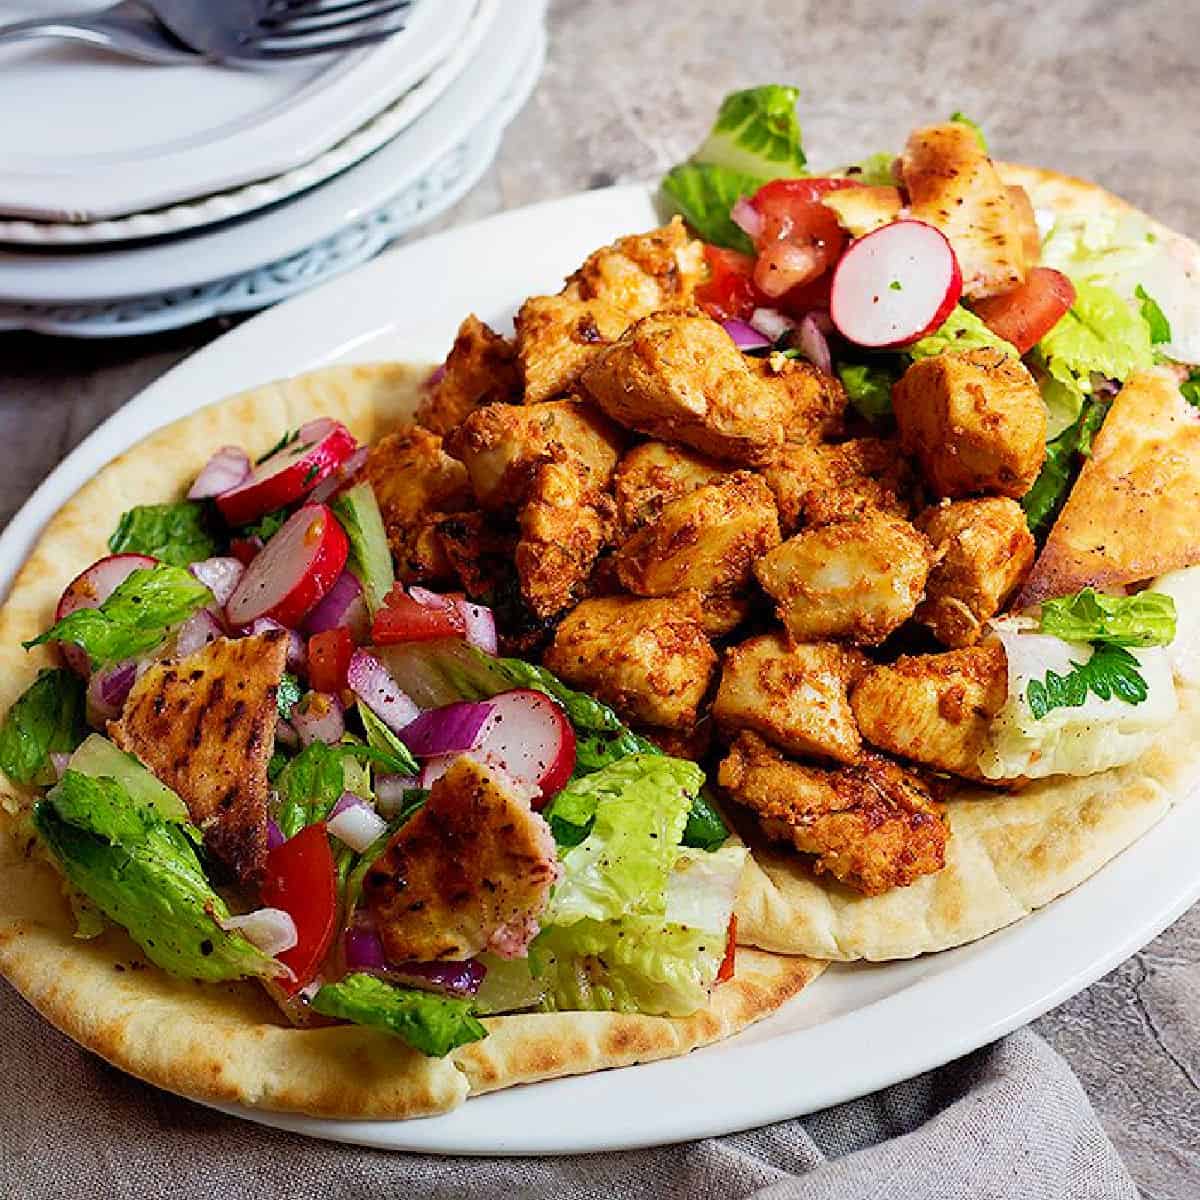 Shish tawook on a platter with bread and salad. 